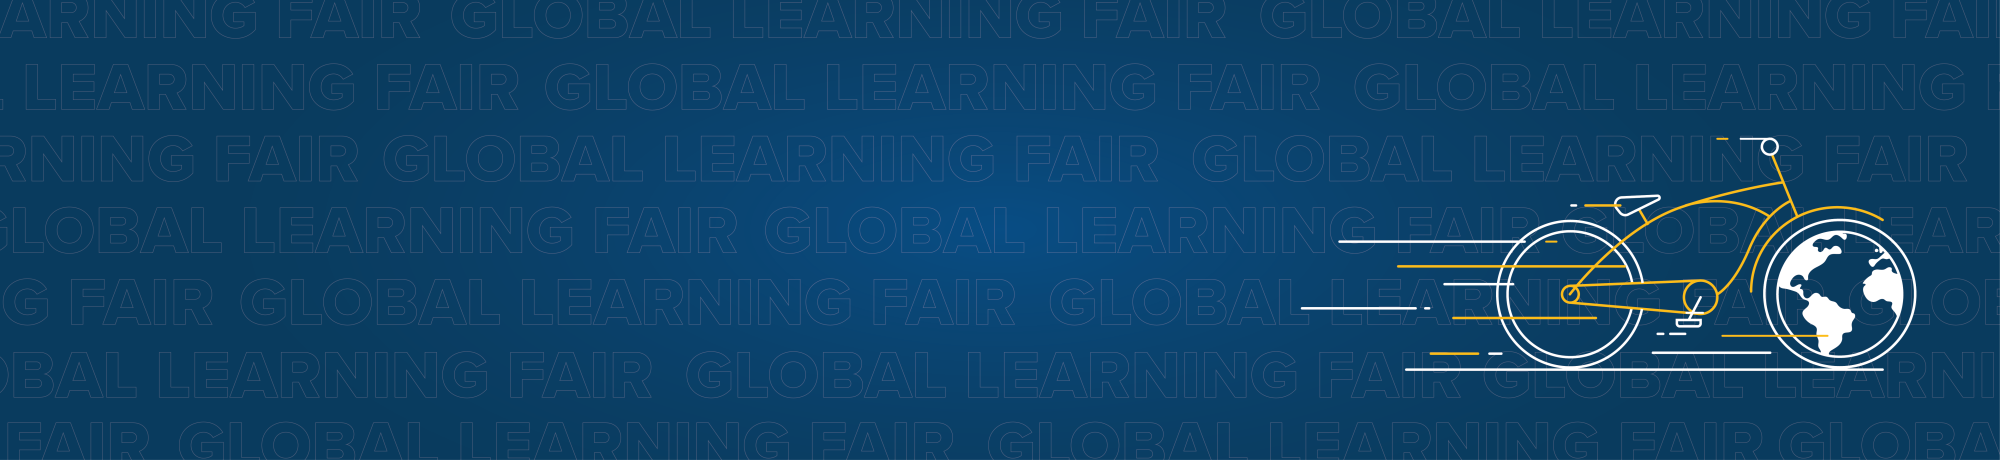 Global Learning Fair - Page Header